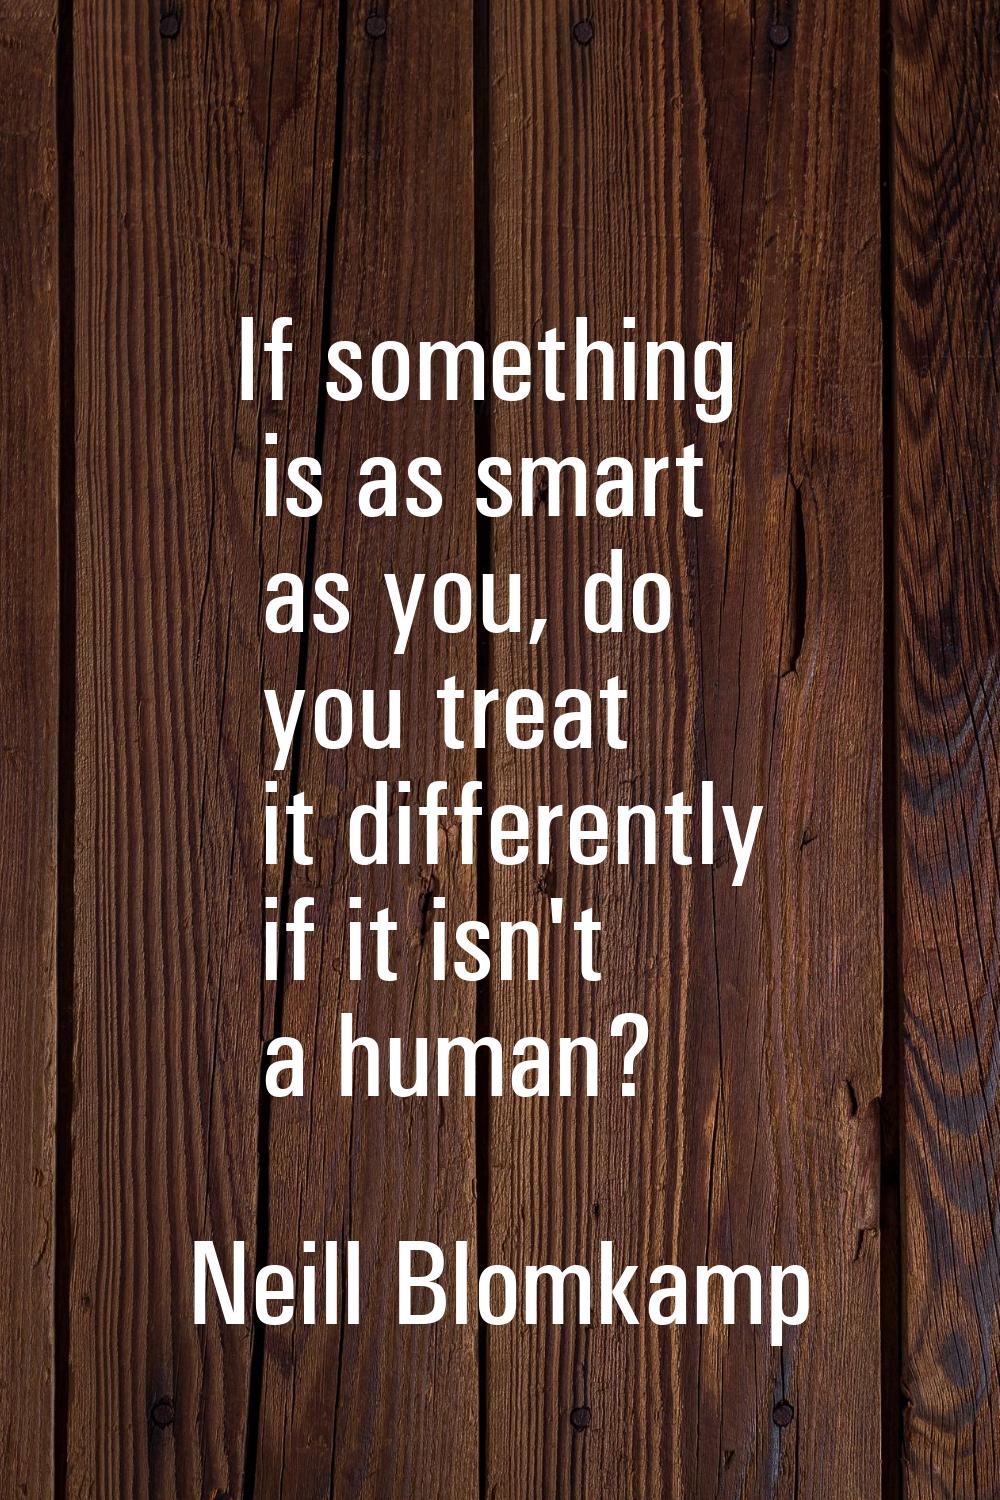 If something is as smart as you, do you treat it differently if it isn't a human?